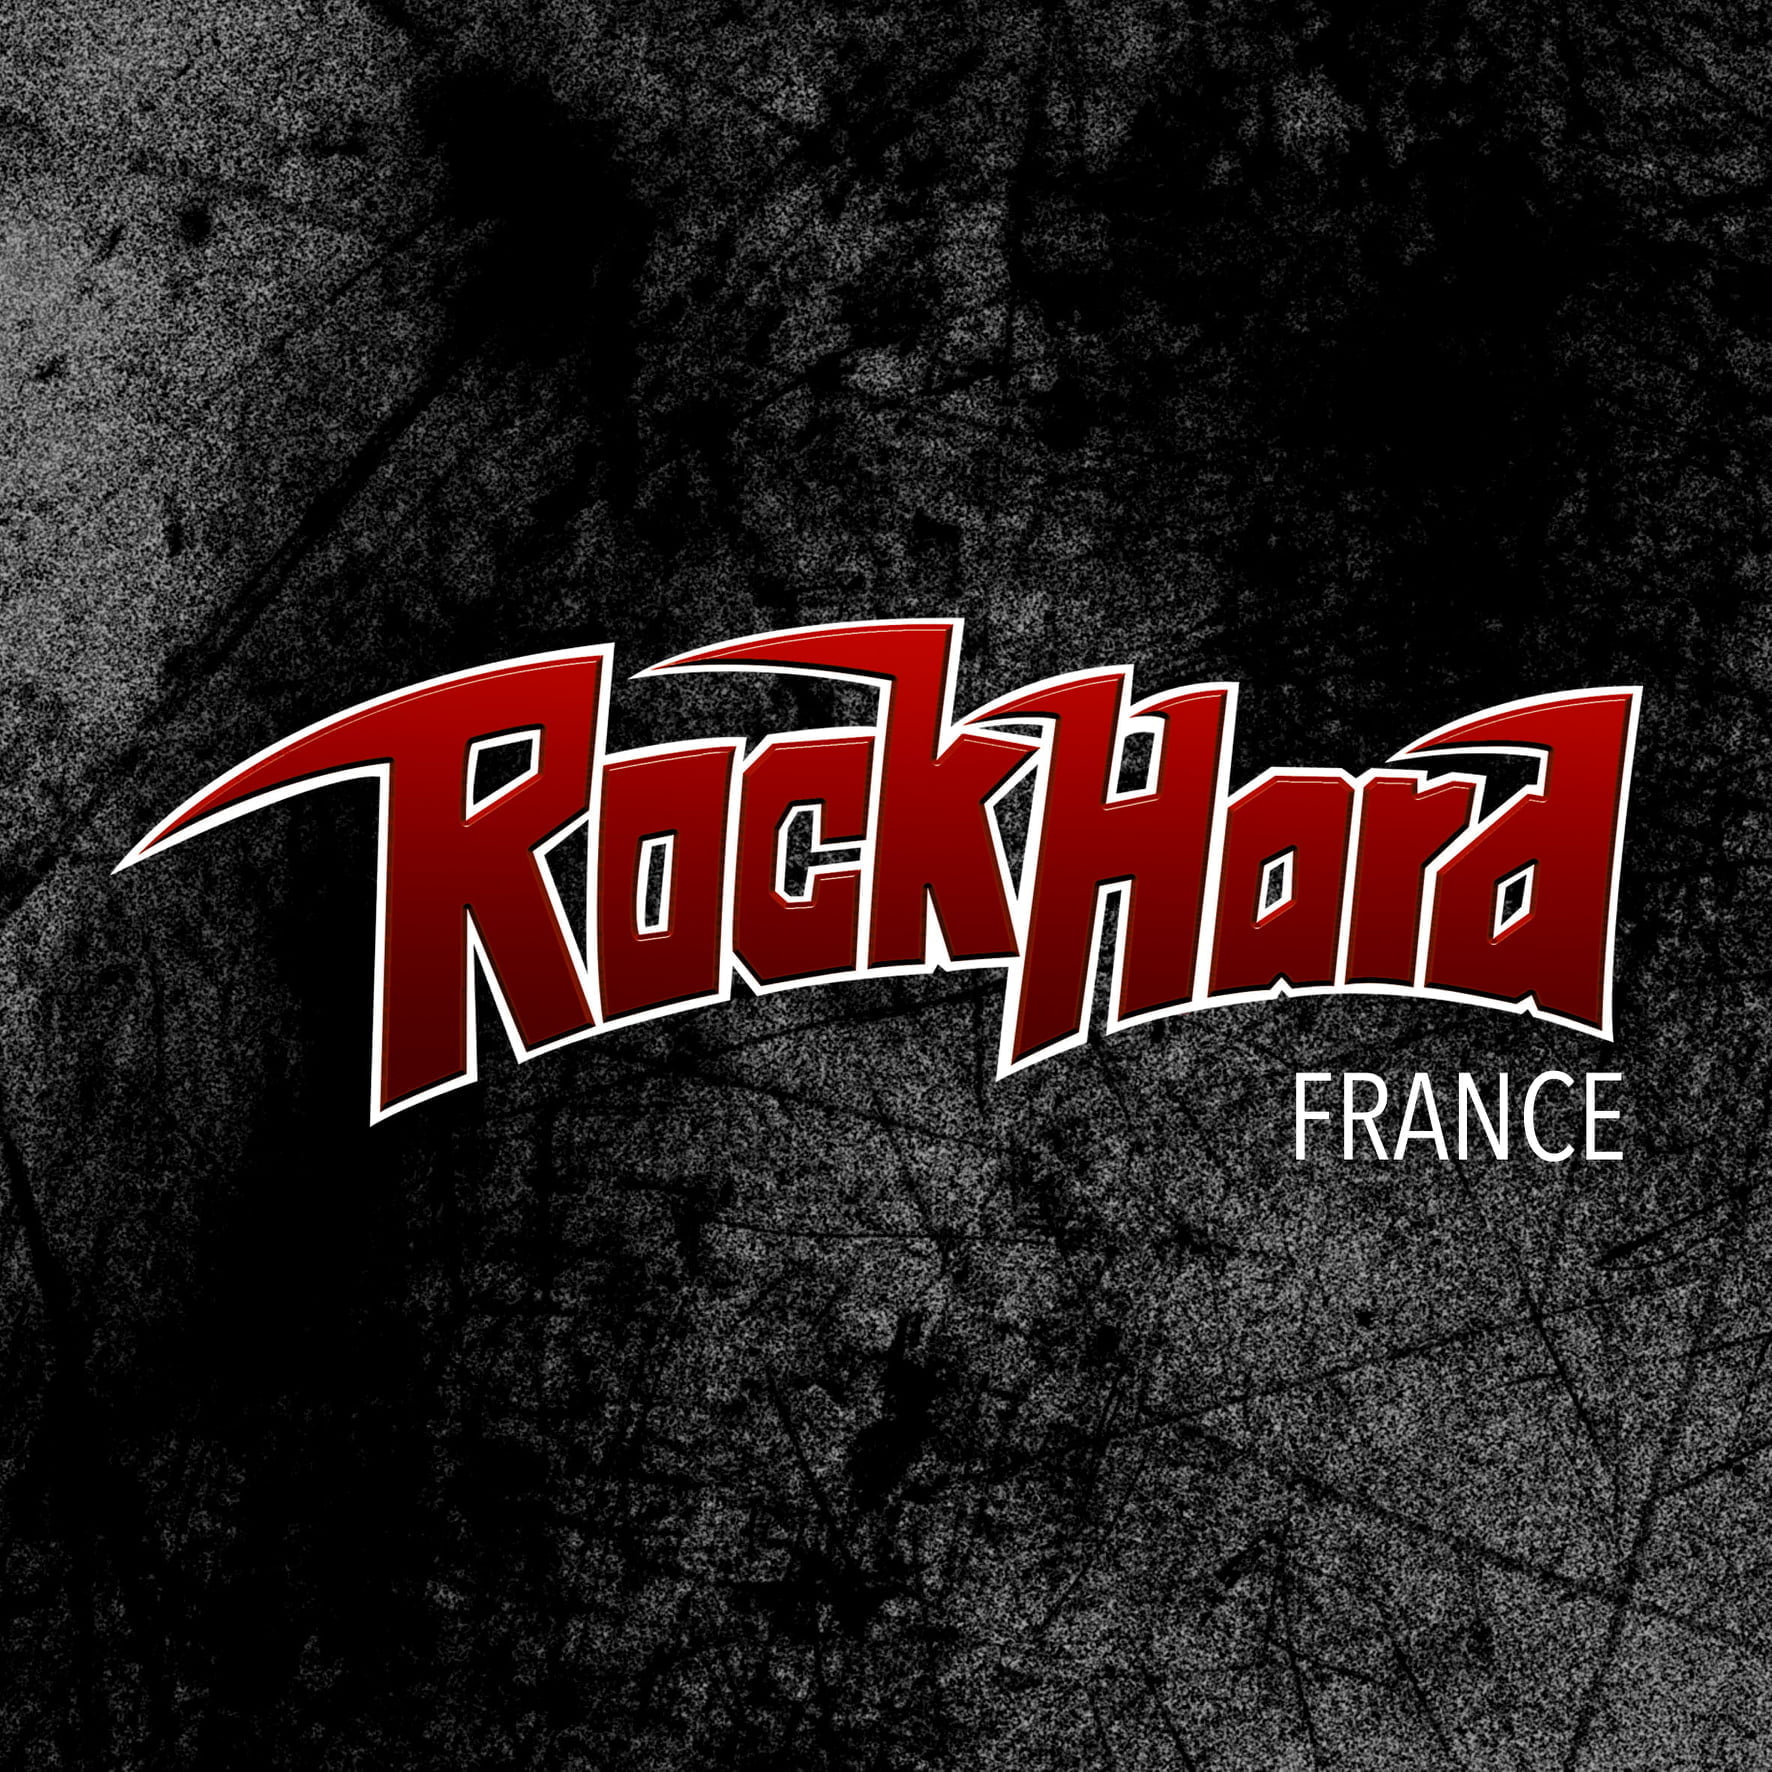 You are currently viewing ROCK HARD de novembre (#214)